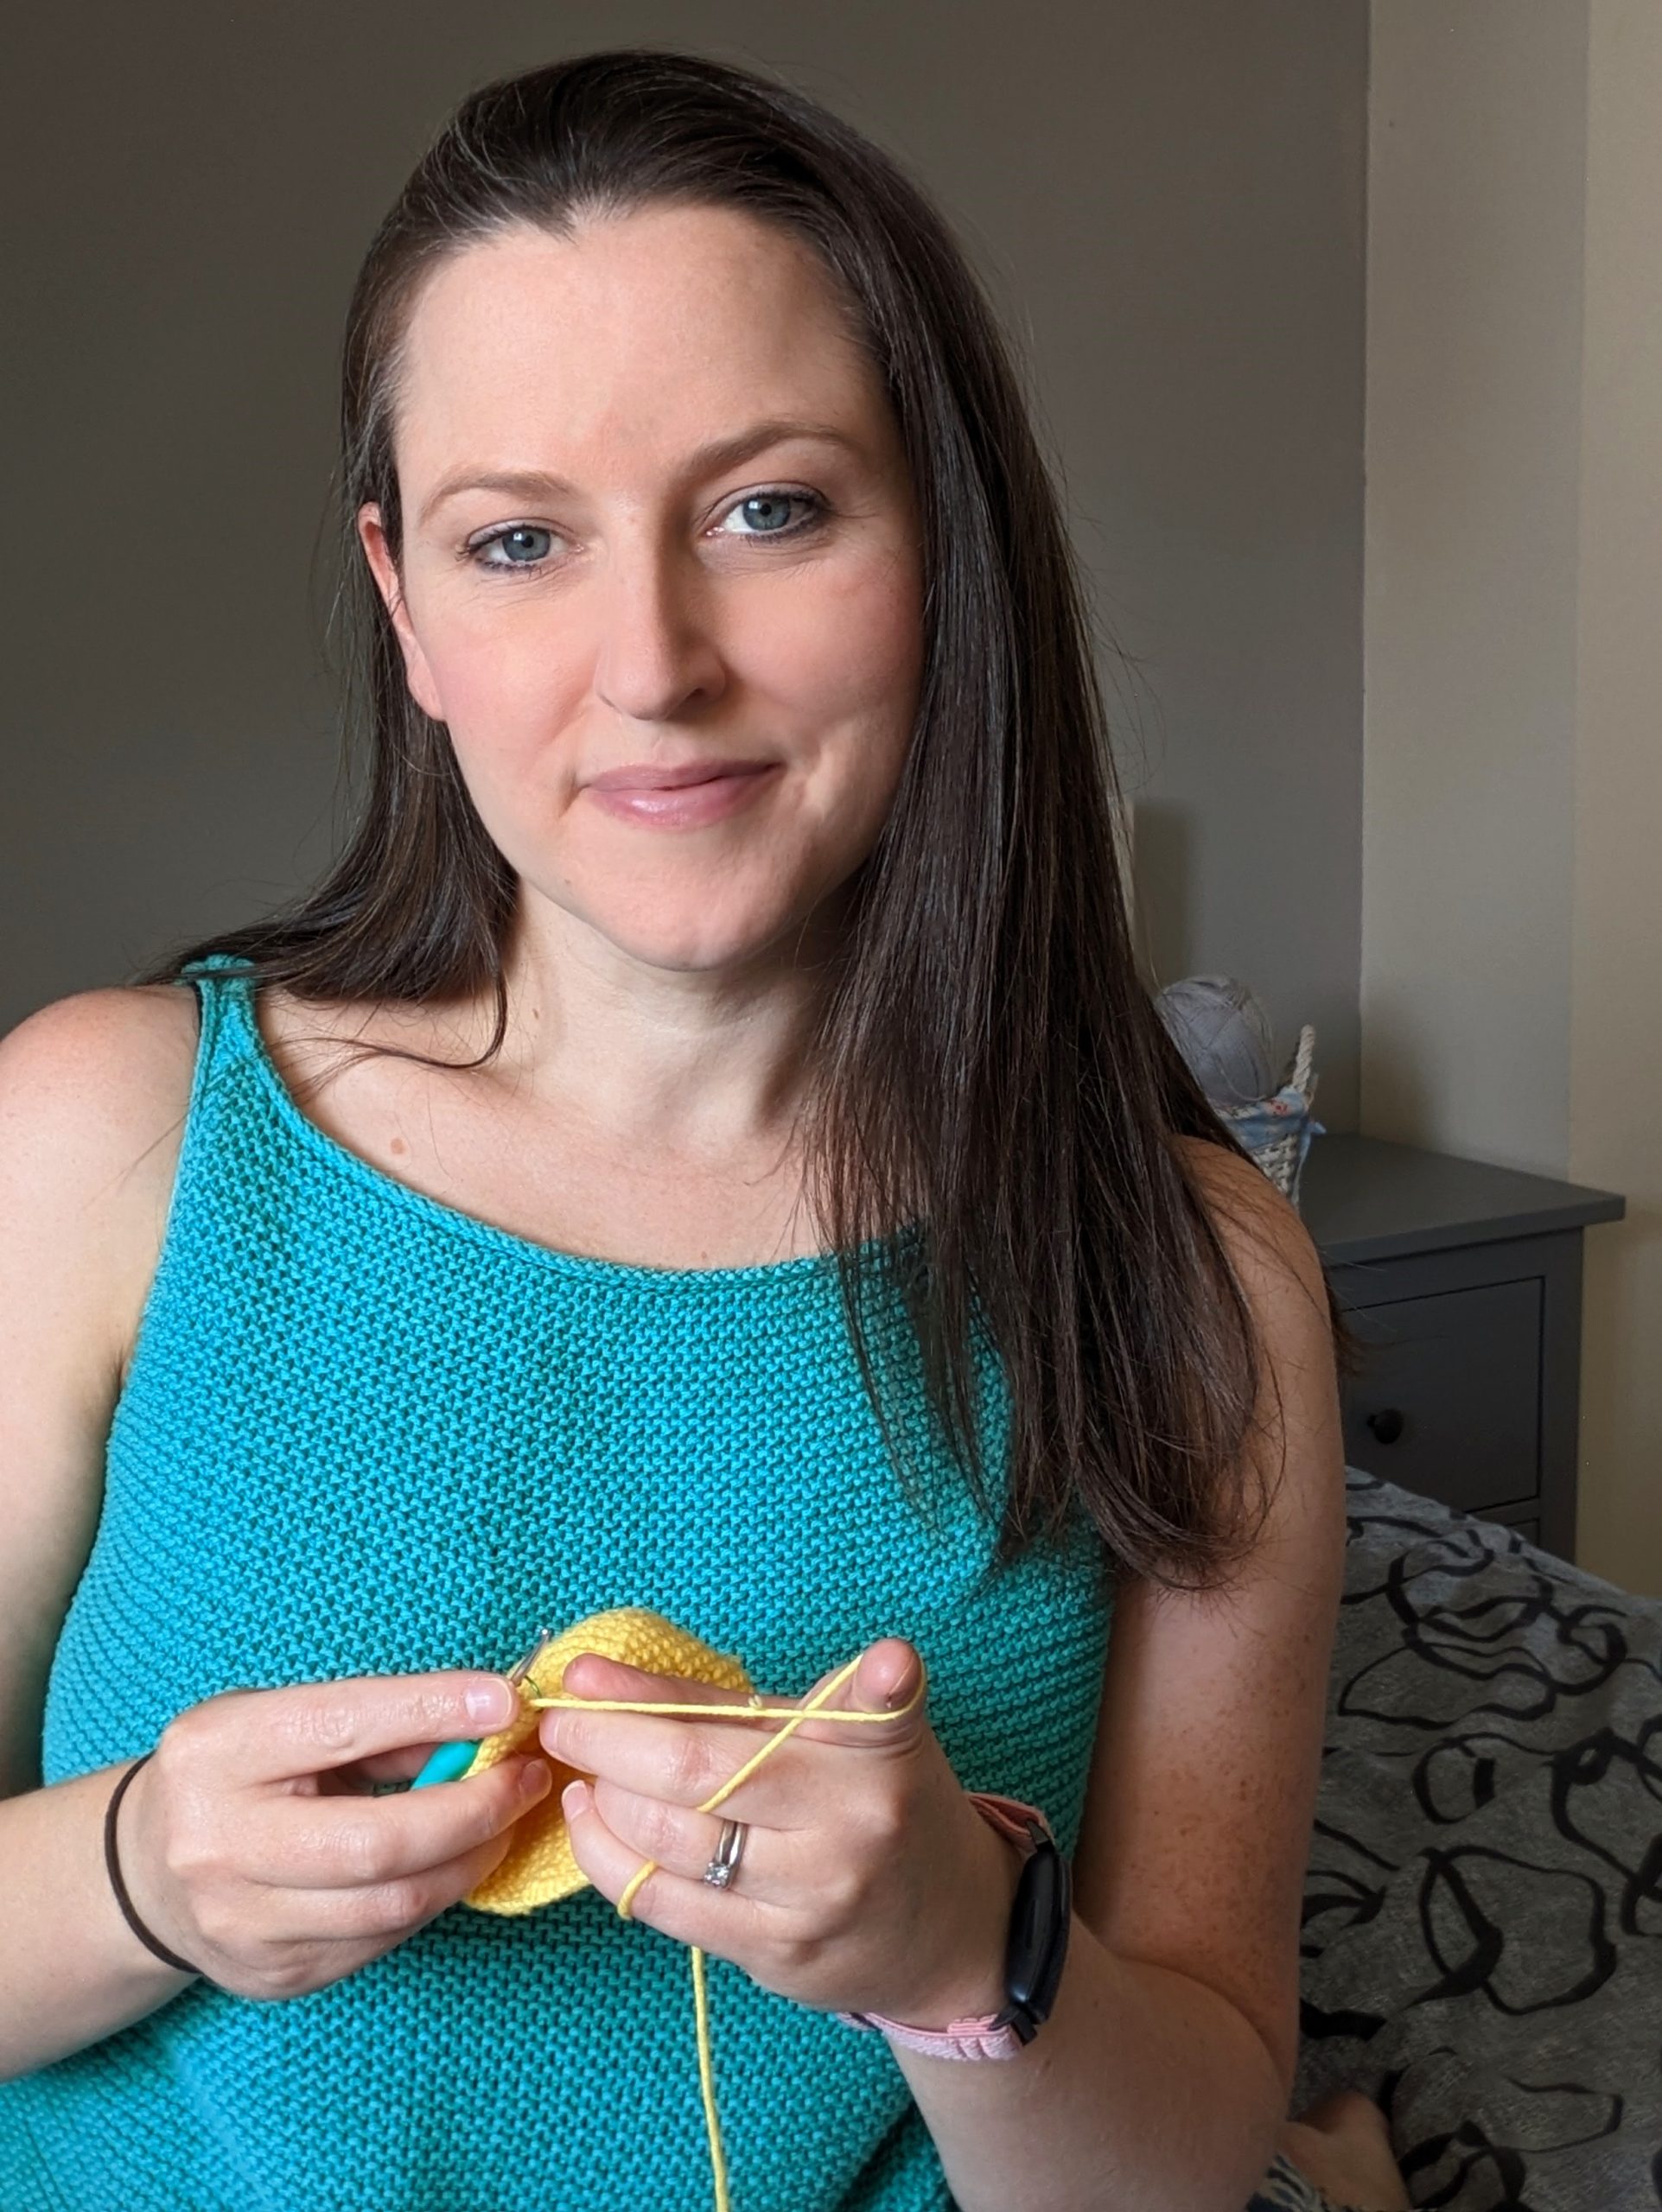 Megan is standing wearing a knitted top, holding yellow yarn and a crochet hook in her hands.